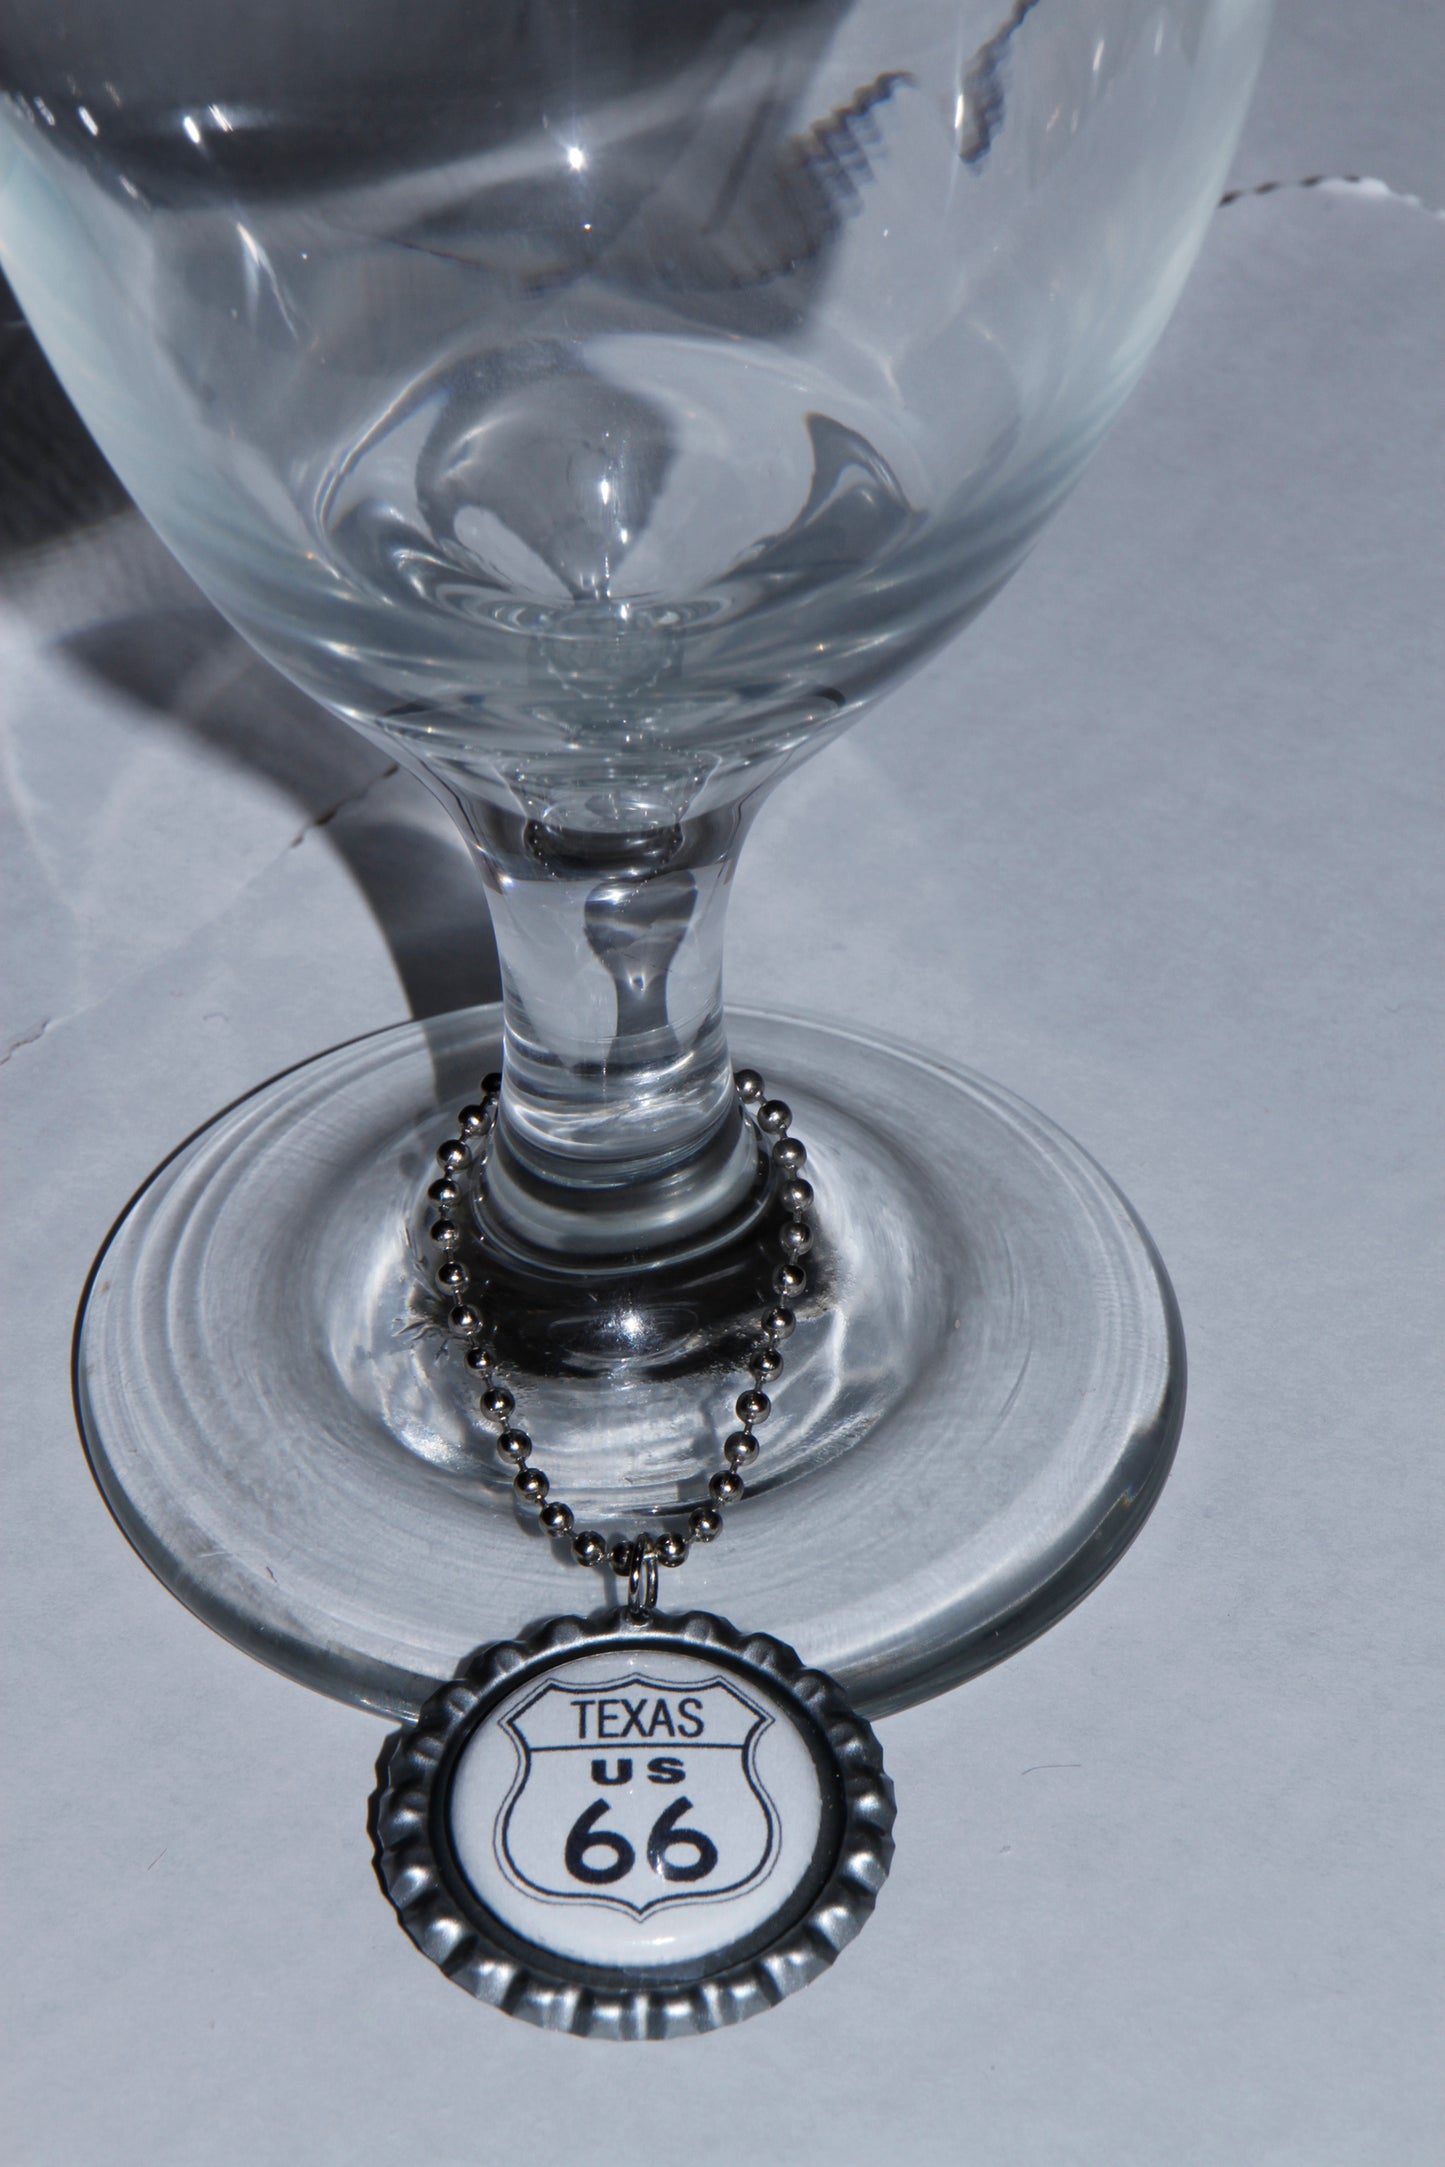 Route 66 Wine Glass Charms features one charm for each state on Route 66